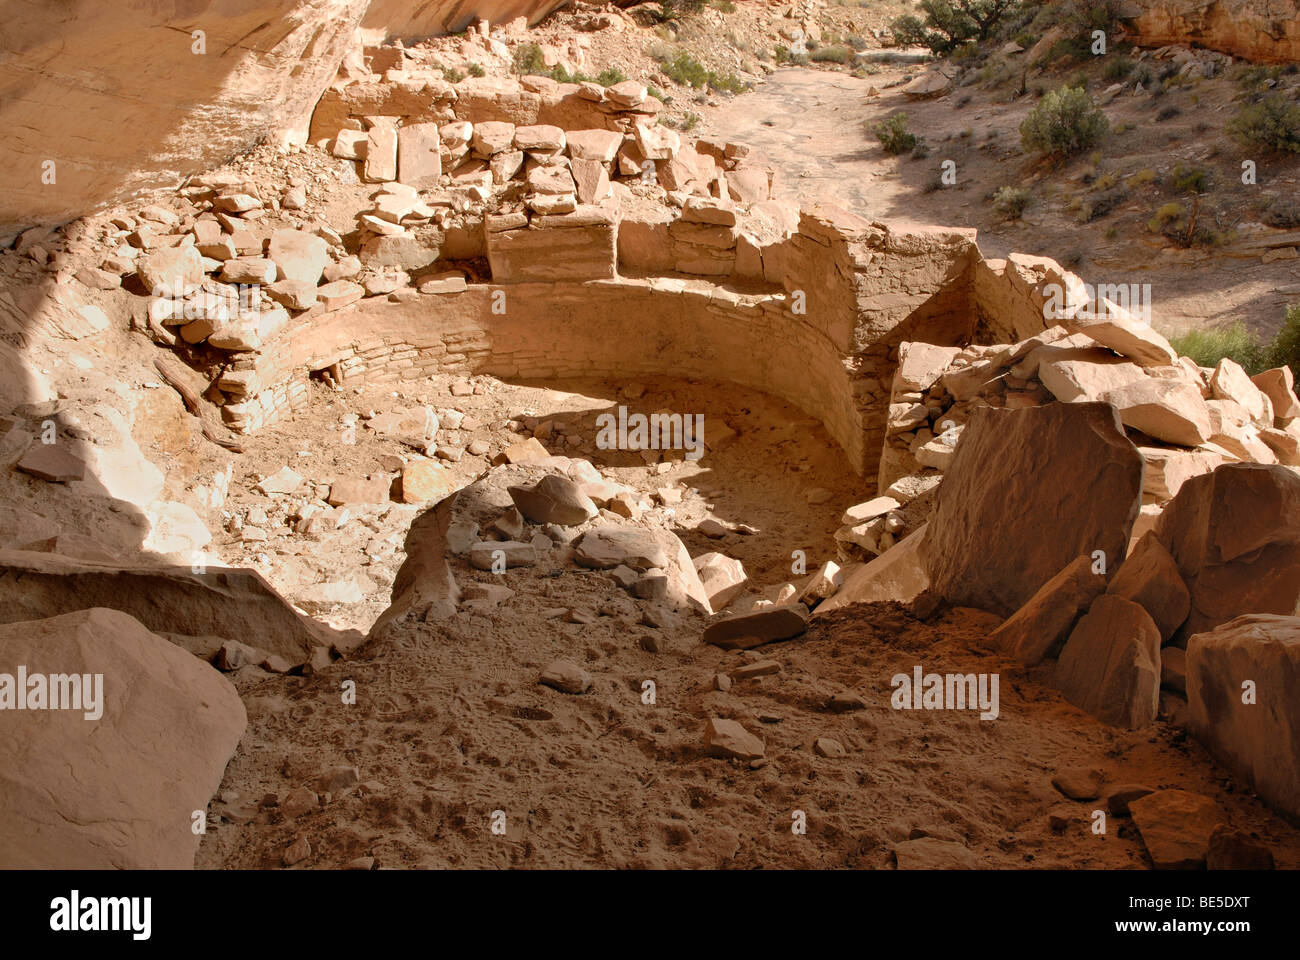 Historical remains of a Kiva, cultural site of the Anasazi Indians around 1100 AD, Cold Springs Cave near Bluff, Utah, USA Stock Photo